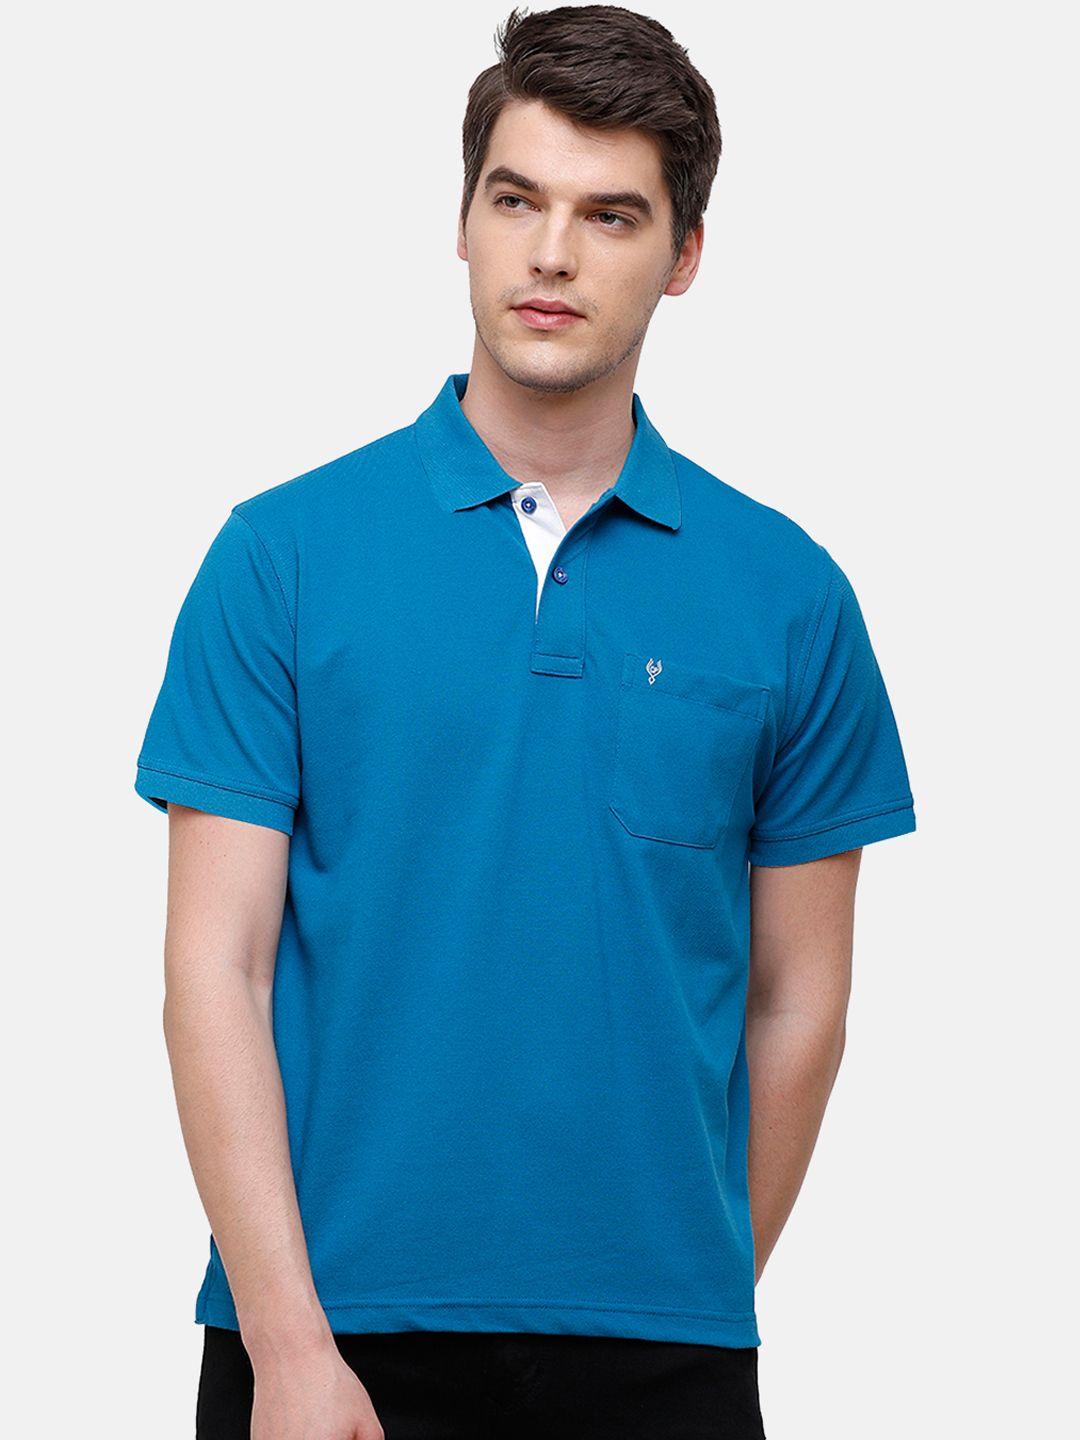 classic polo men teal solid polo collar t-shirt